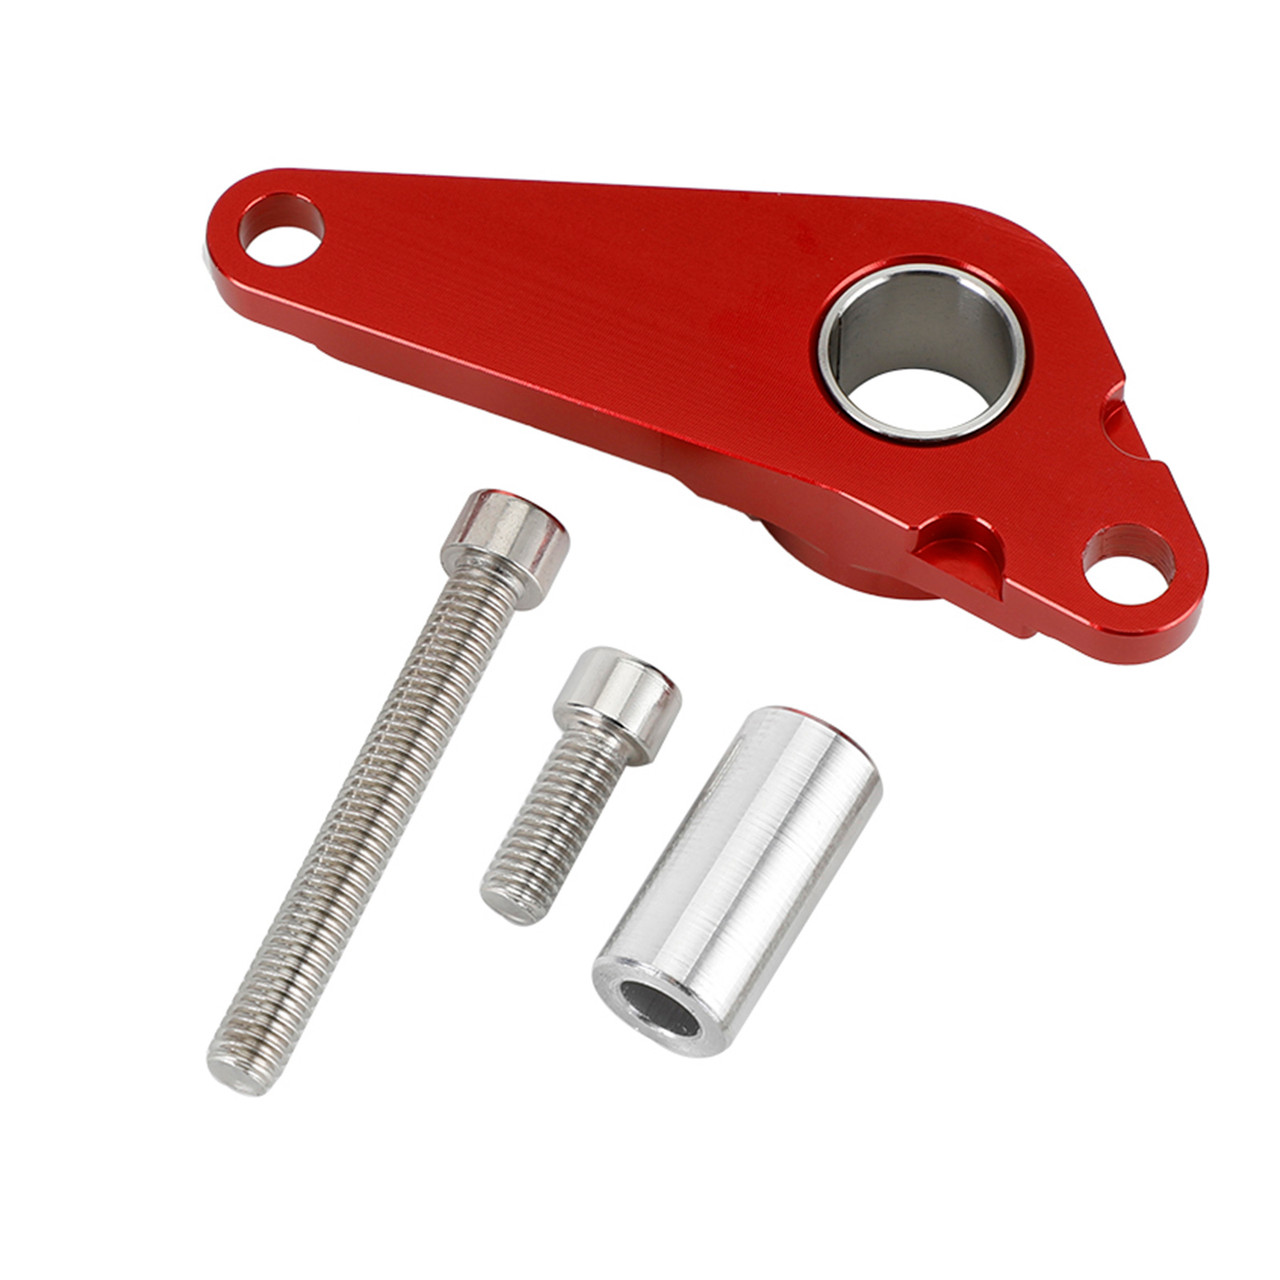 Cnc Shifting Gear Stabilizer High Modified Red For Honda CBR600RR 2020-2022